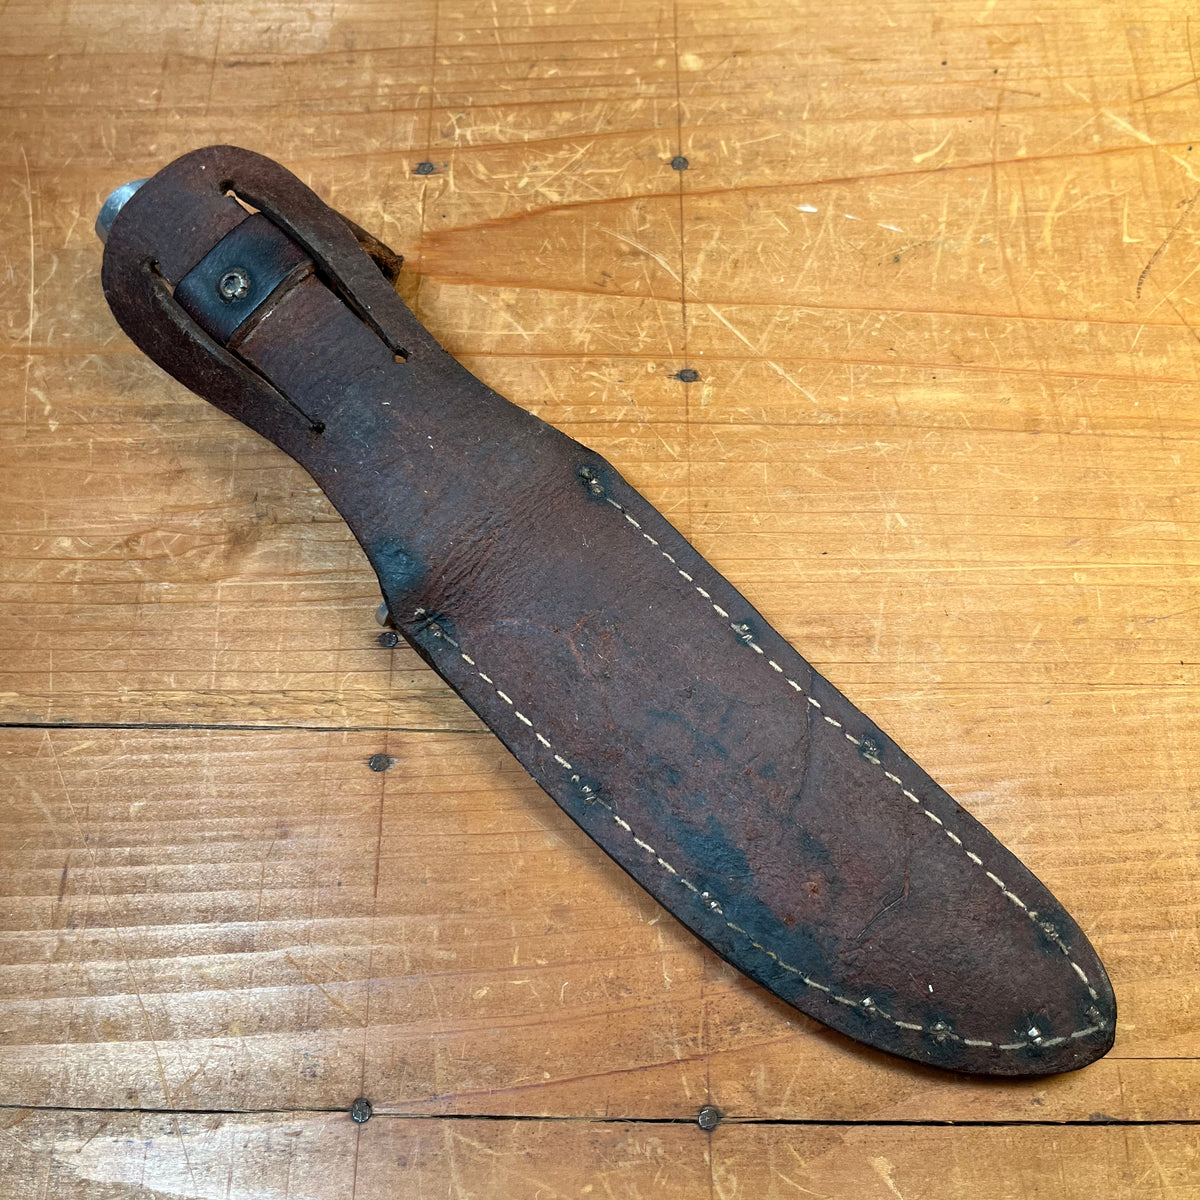 West Cut 4.5” Fixed Blade Knife Boulder Colo. 1950's